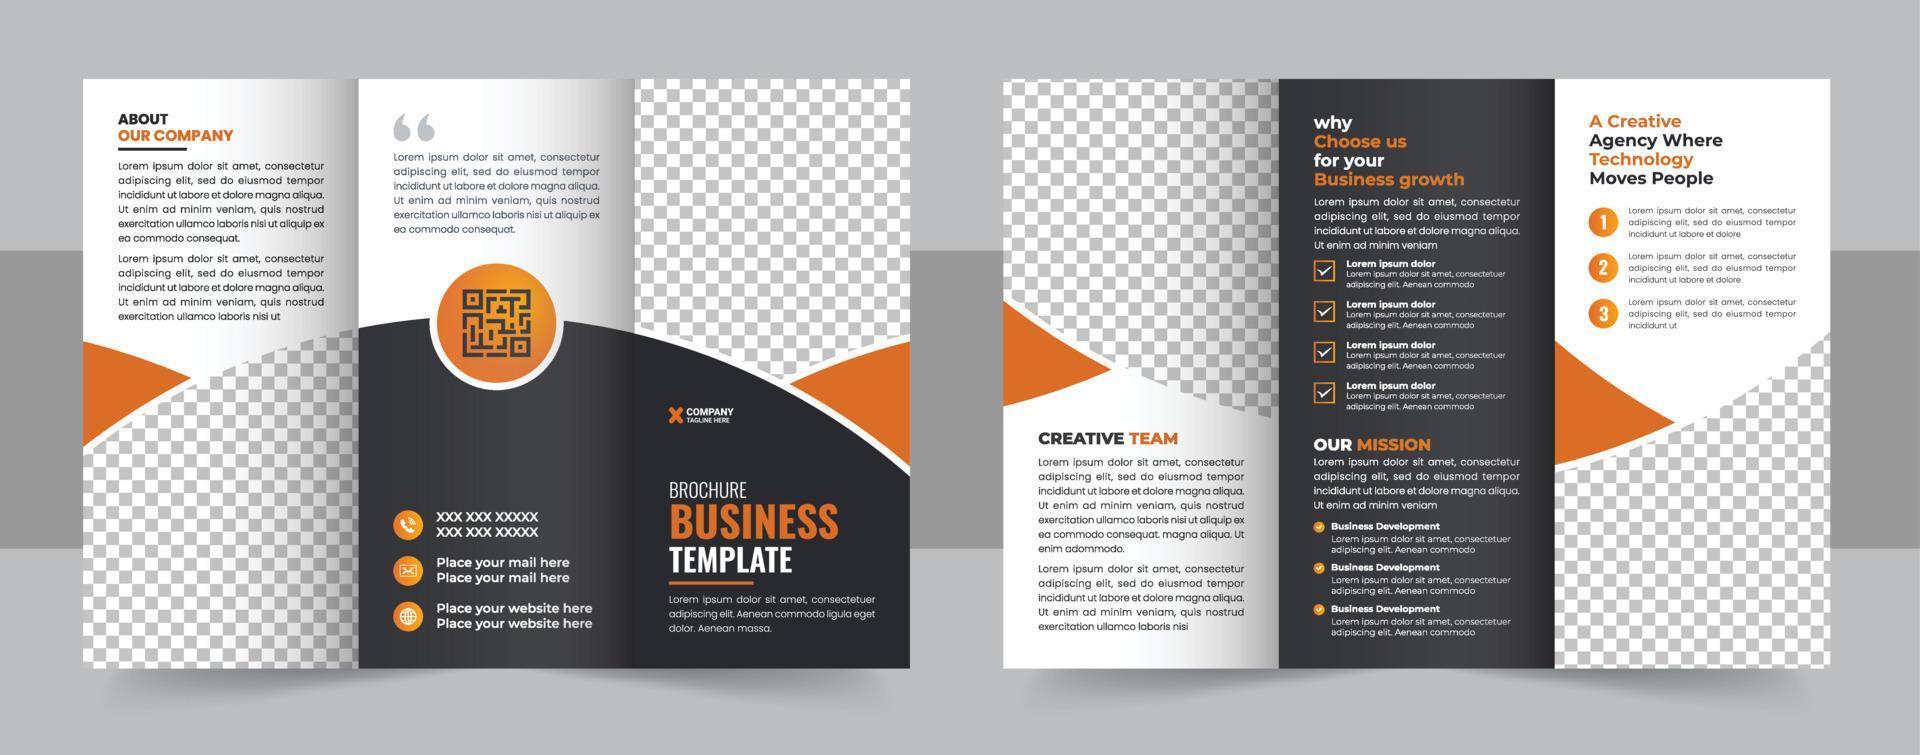 Corporate business trifold brochure template. Creative business trifold brochure template vector